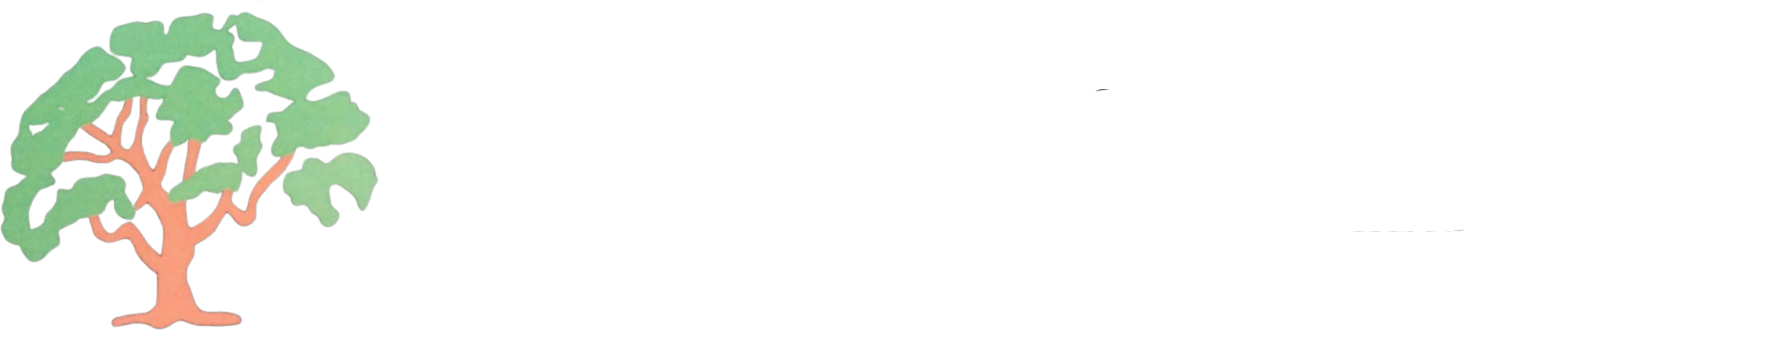 1 Mccormick Landscaping & Lawn